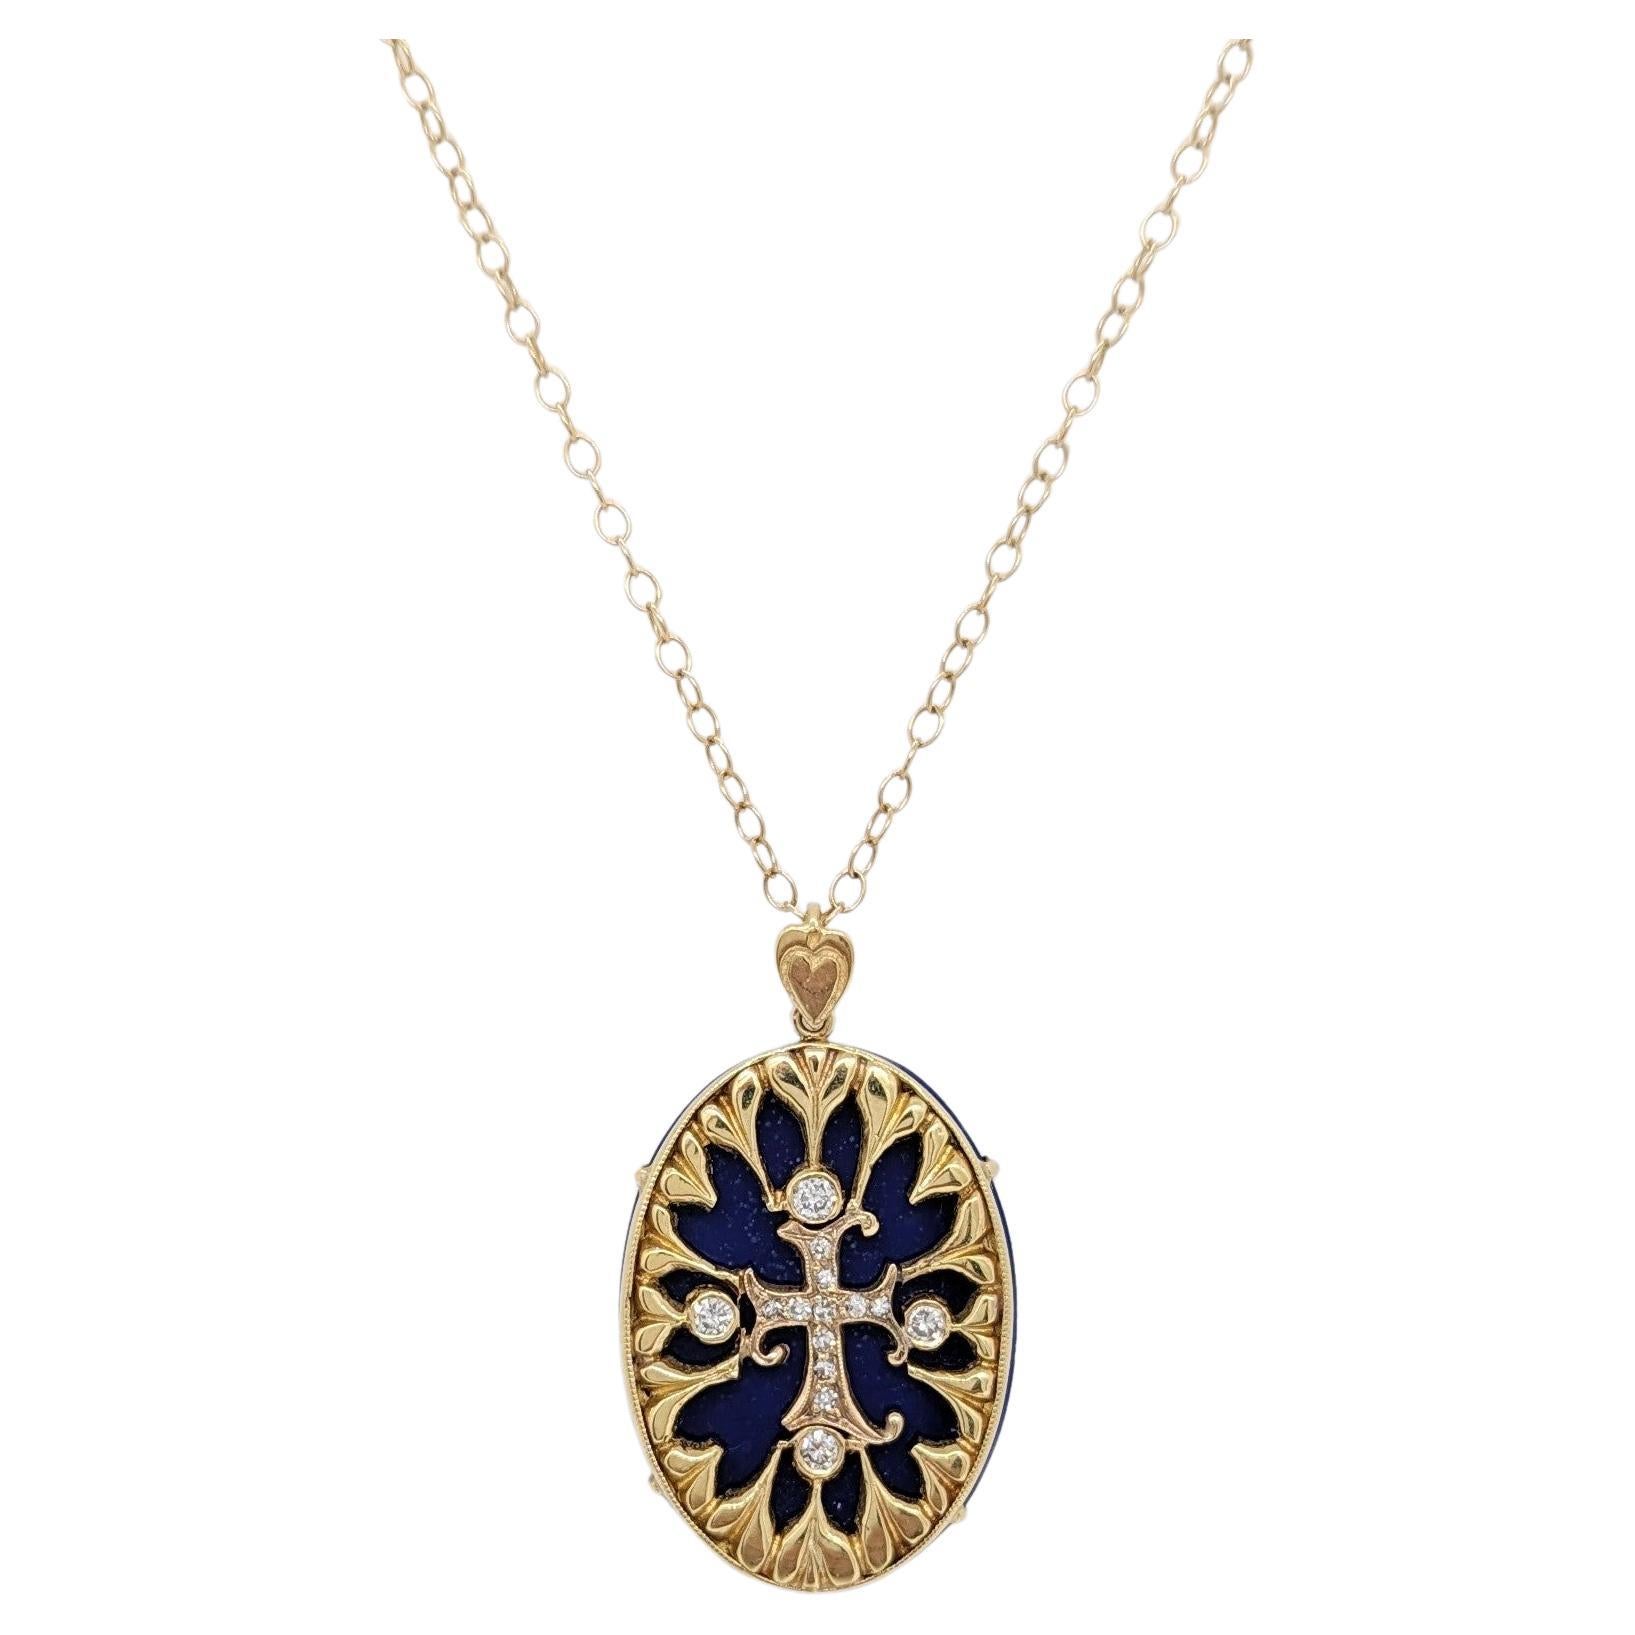 White Diamond Round and Blue Oval Pendant Necklace in 14k Yellow Gold